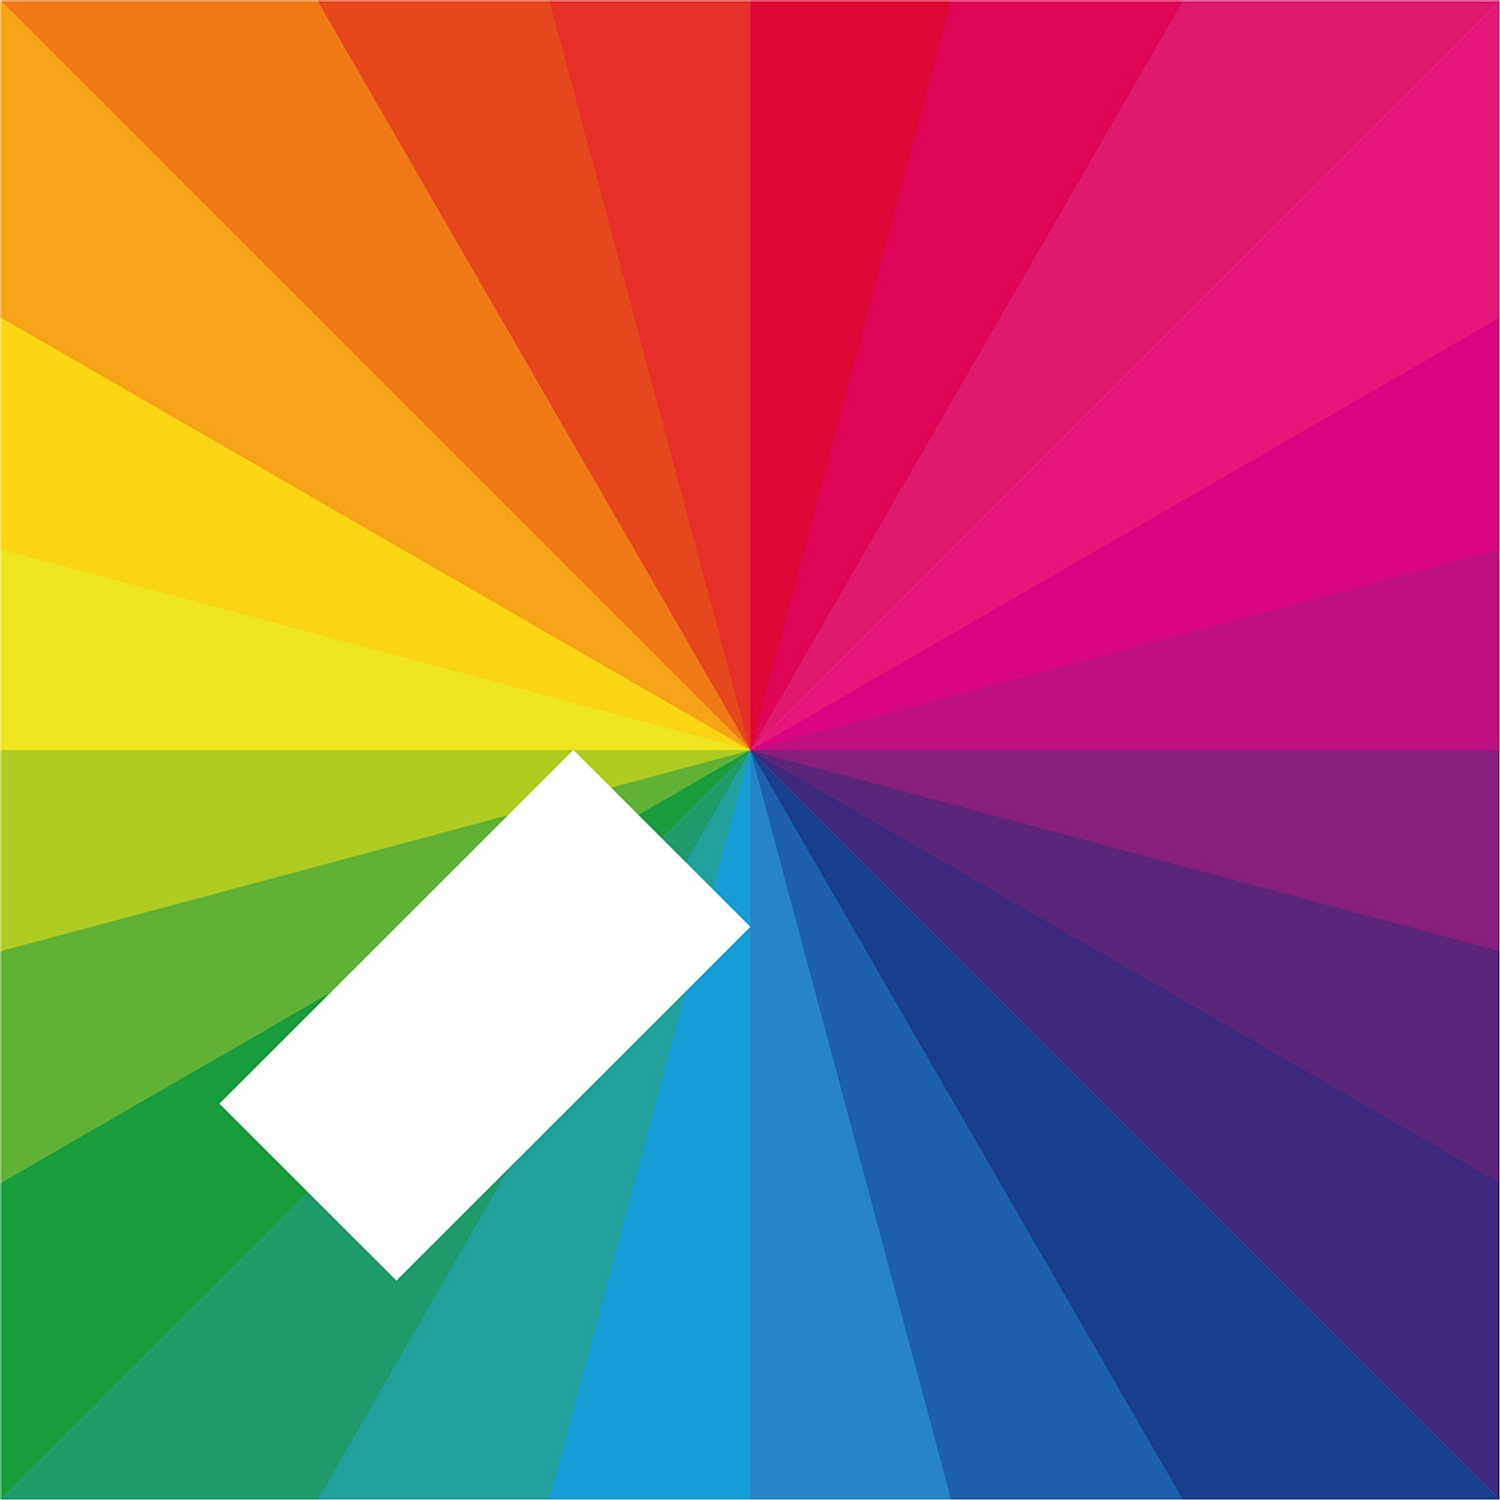 Jamie xx’s debut album will cement his position as Britain’s most exciting producer